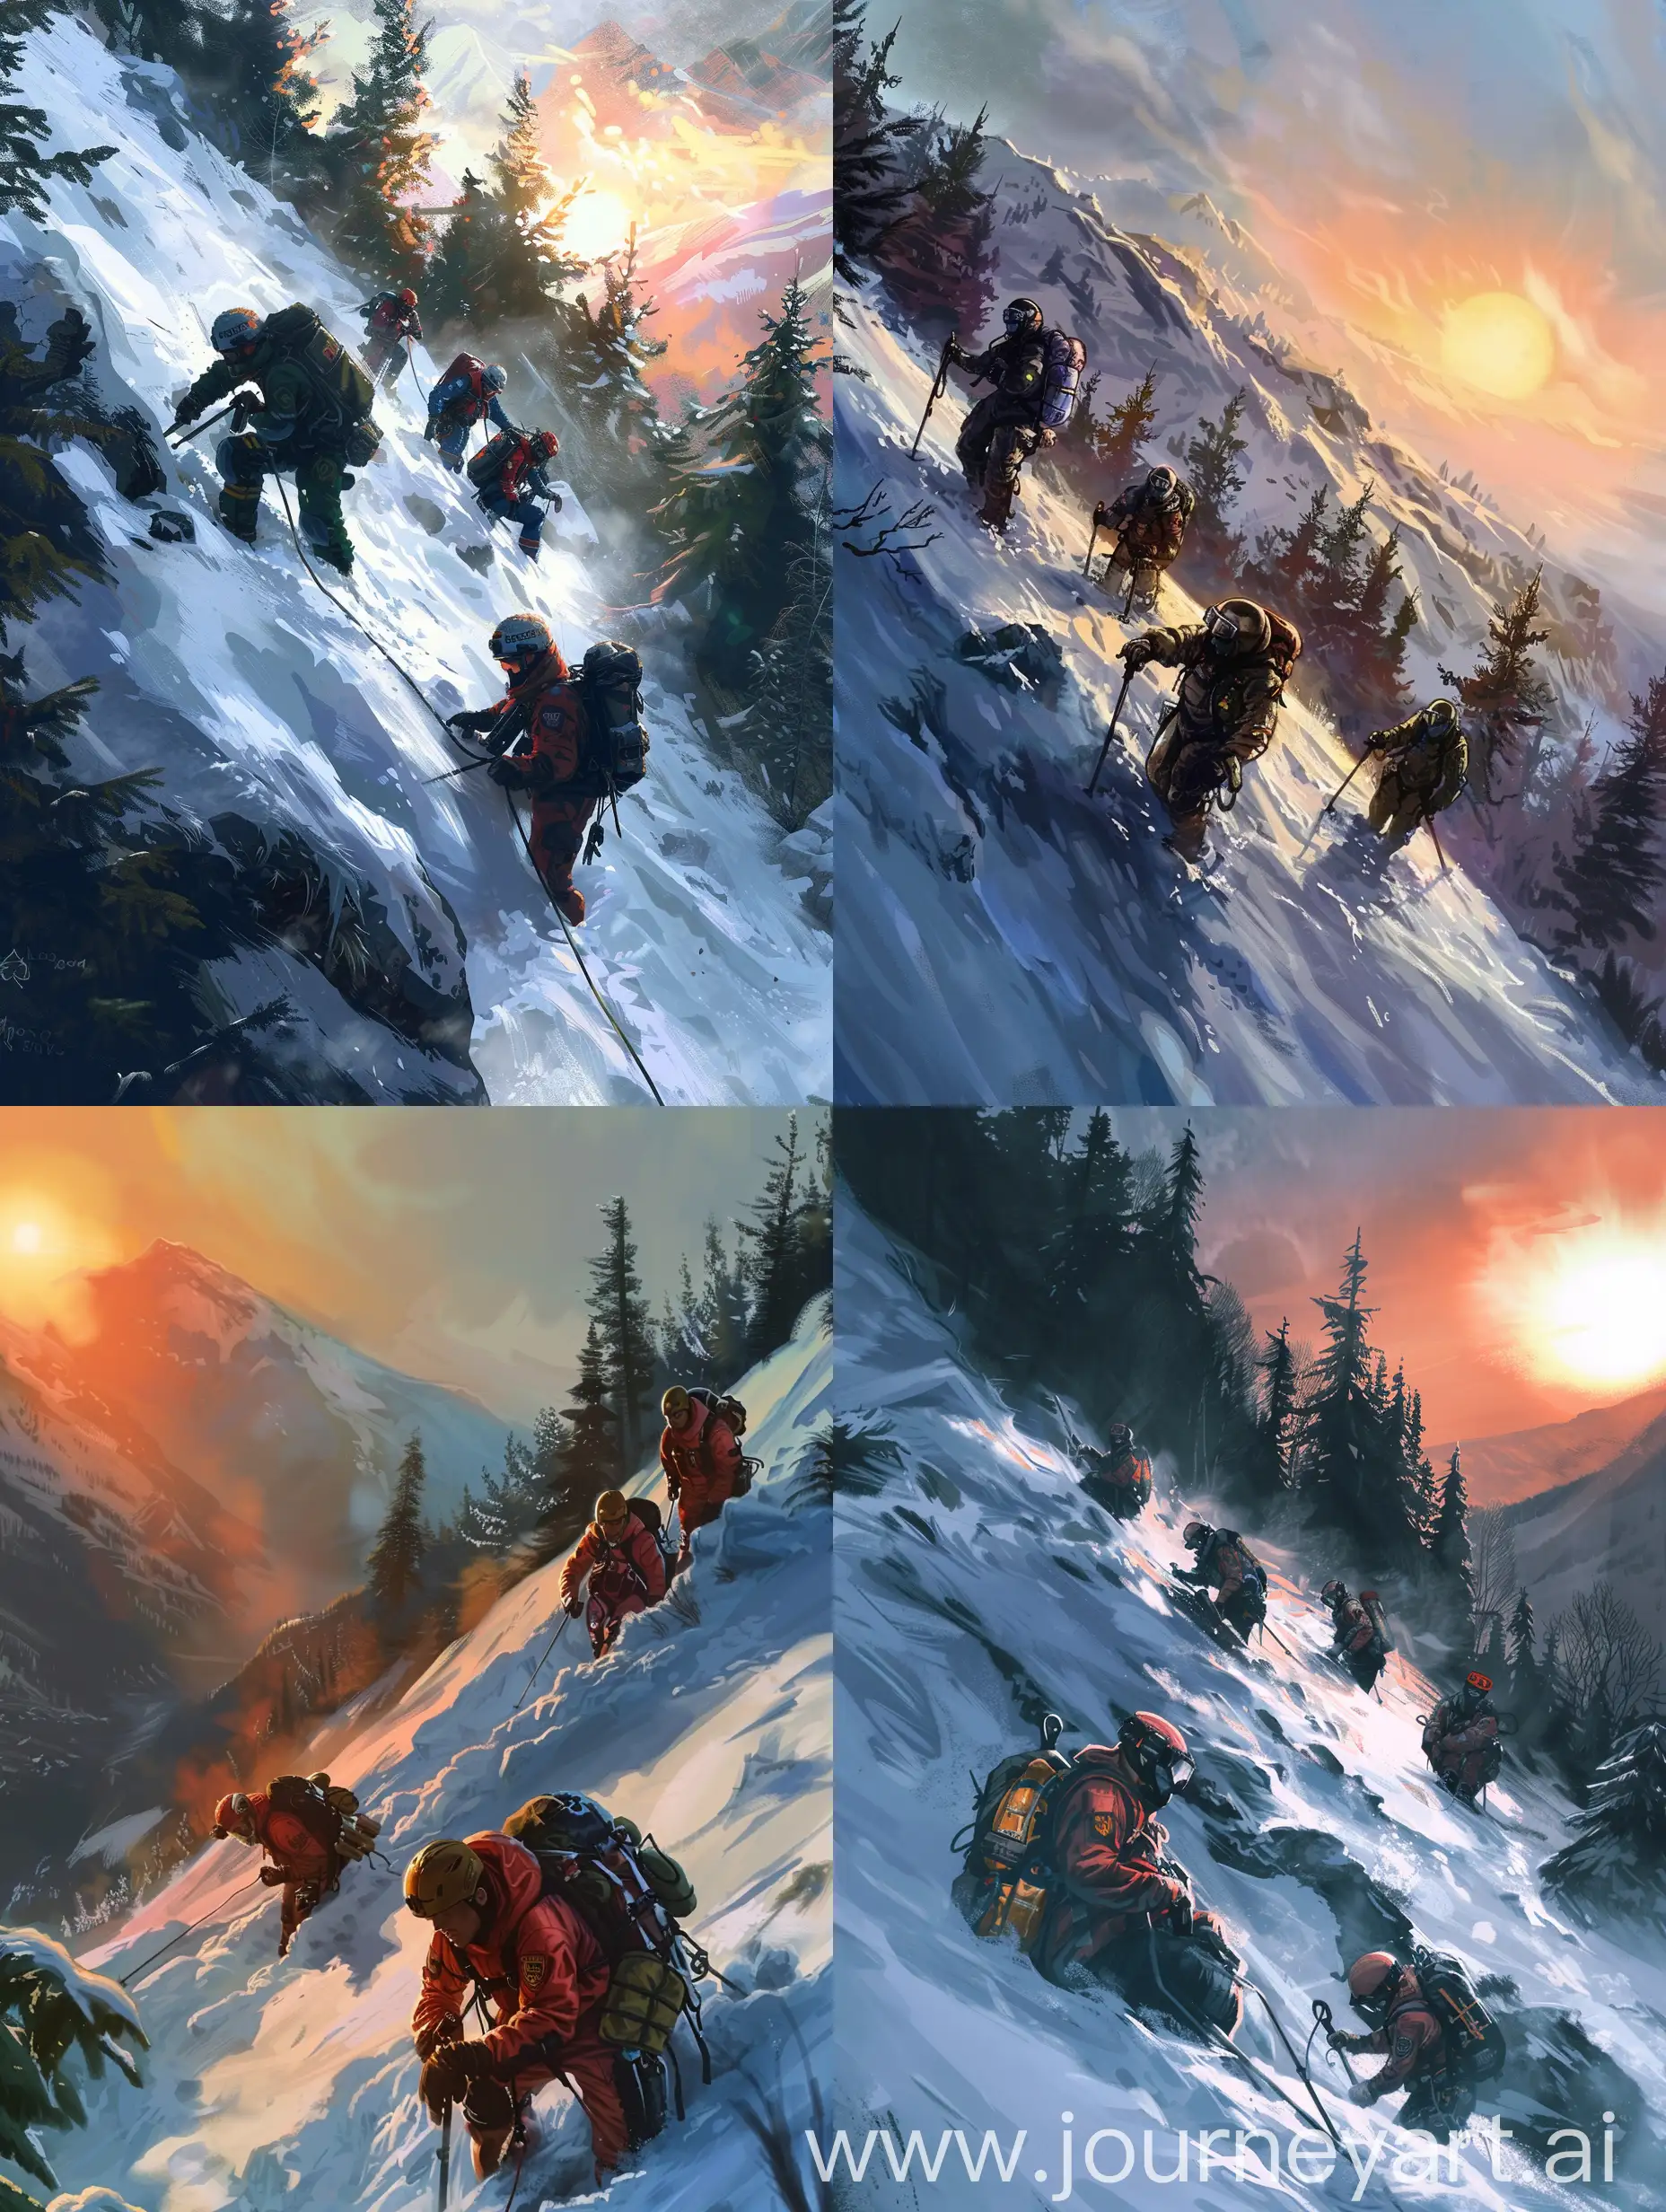 Design a realistic image of a search and rescue team working in a challenging environment. The team members are depicted equipped with search and rescue gear, working on the snowy slopes of a mountain or in a forested area. In the background, the sun is either rising or setting, enhancing the dramatic atmosphere.